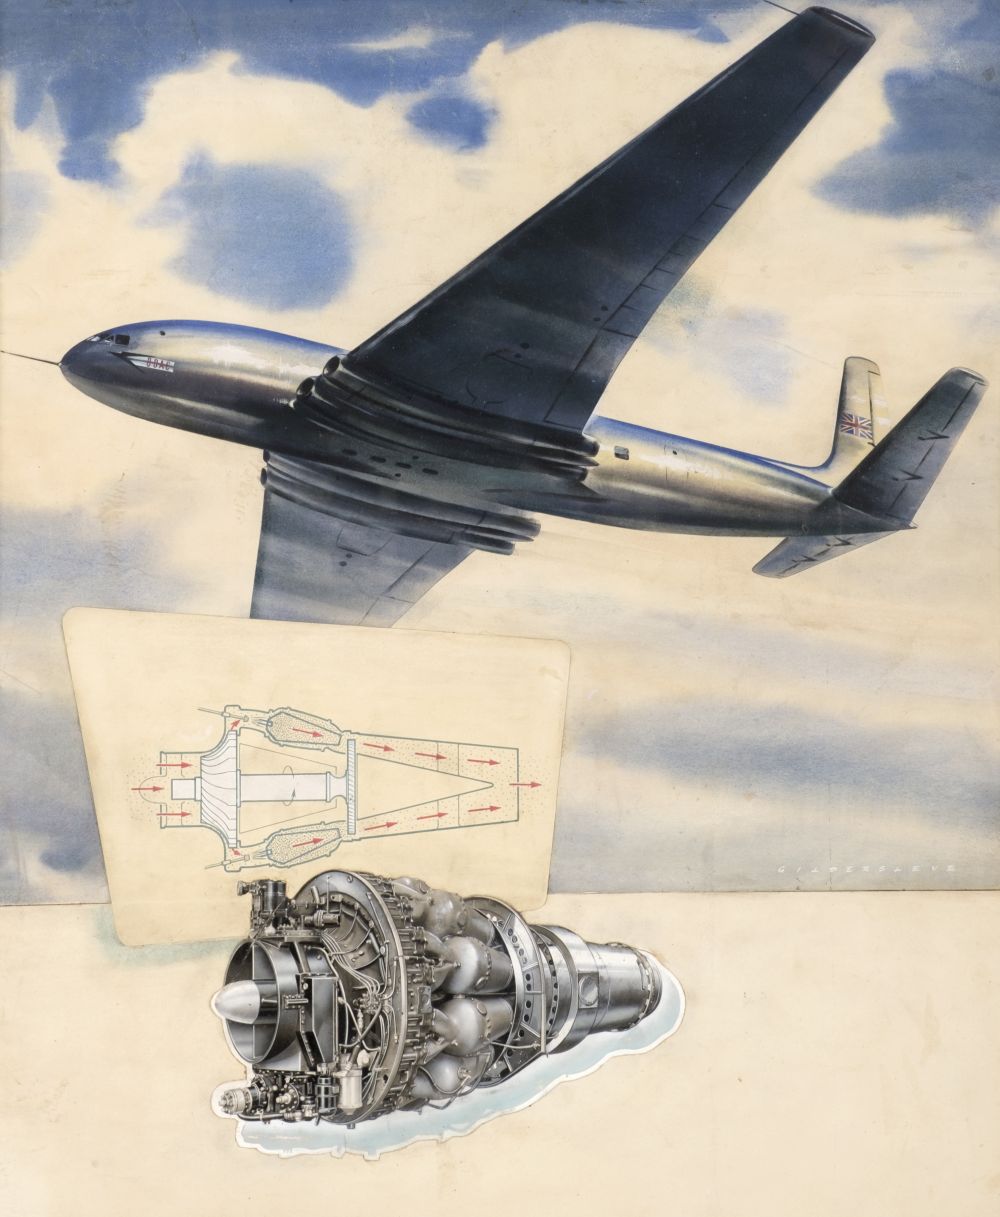 Gildersleve. BOAC with engine designs, 1951, watercolour and collage